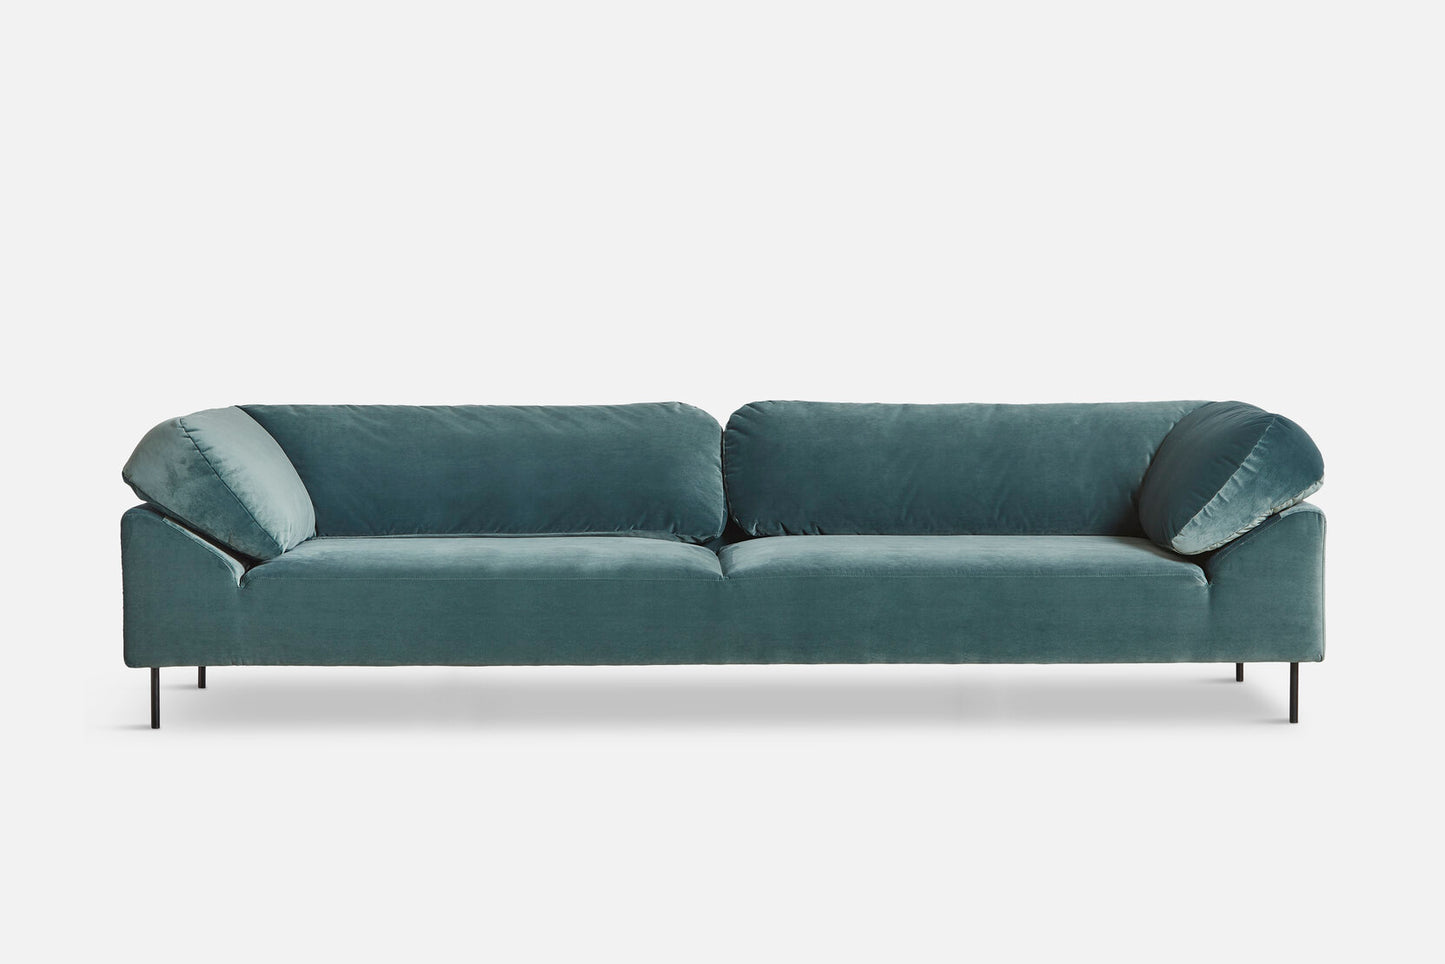 Collar 2, 2.5, & 3 Seat Sofa by Woud